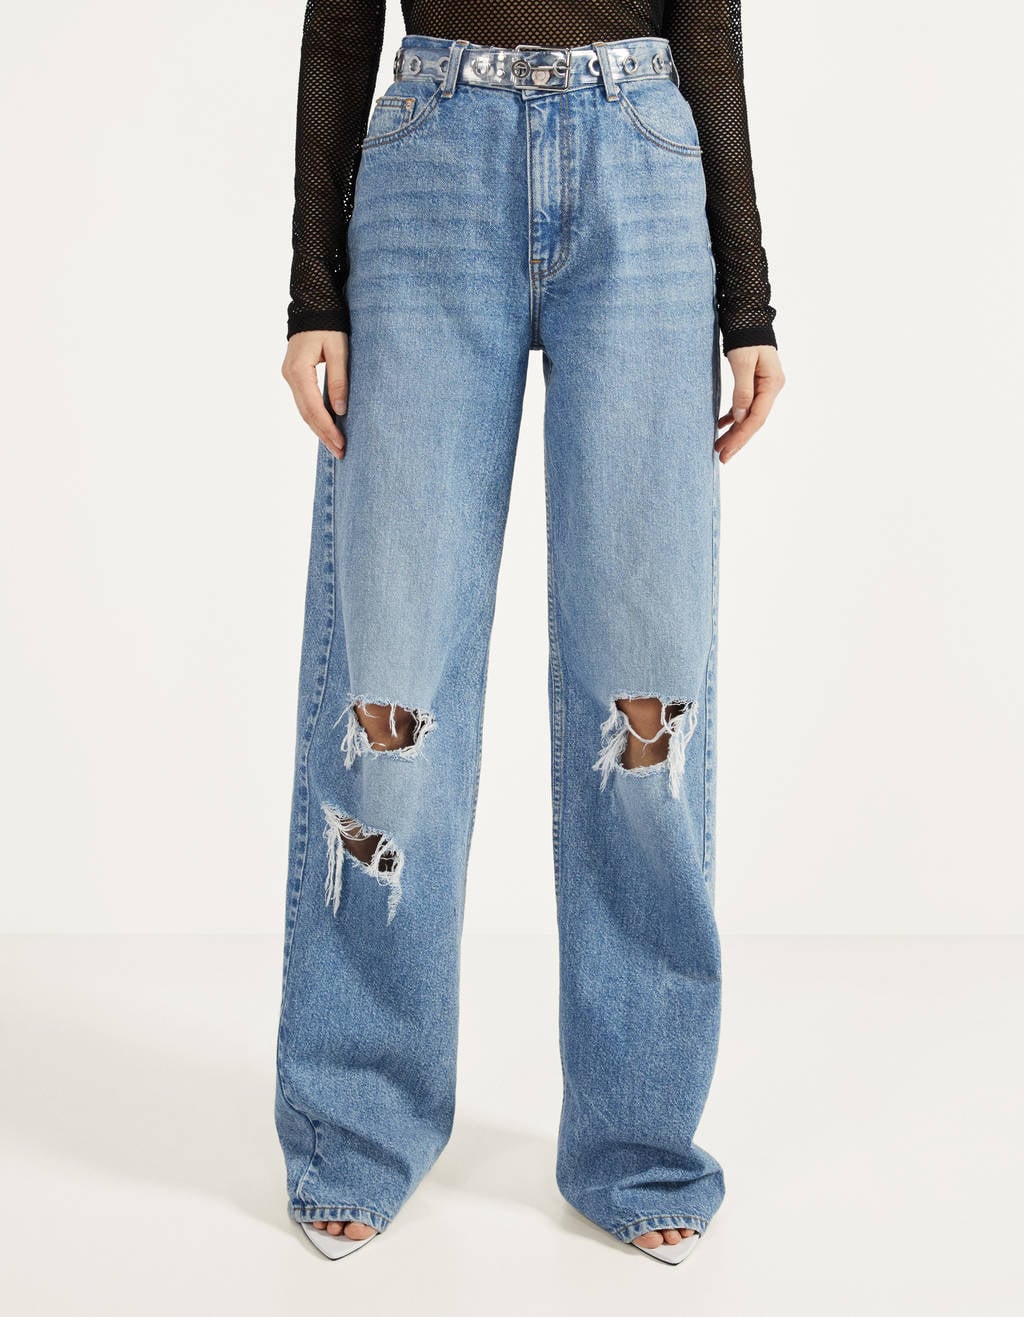 baggy jeans womens 90s